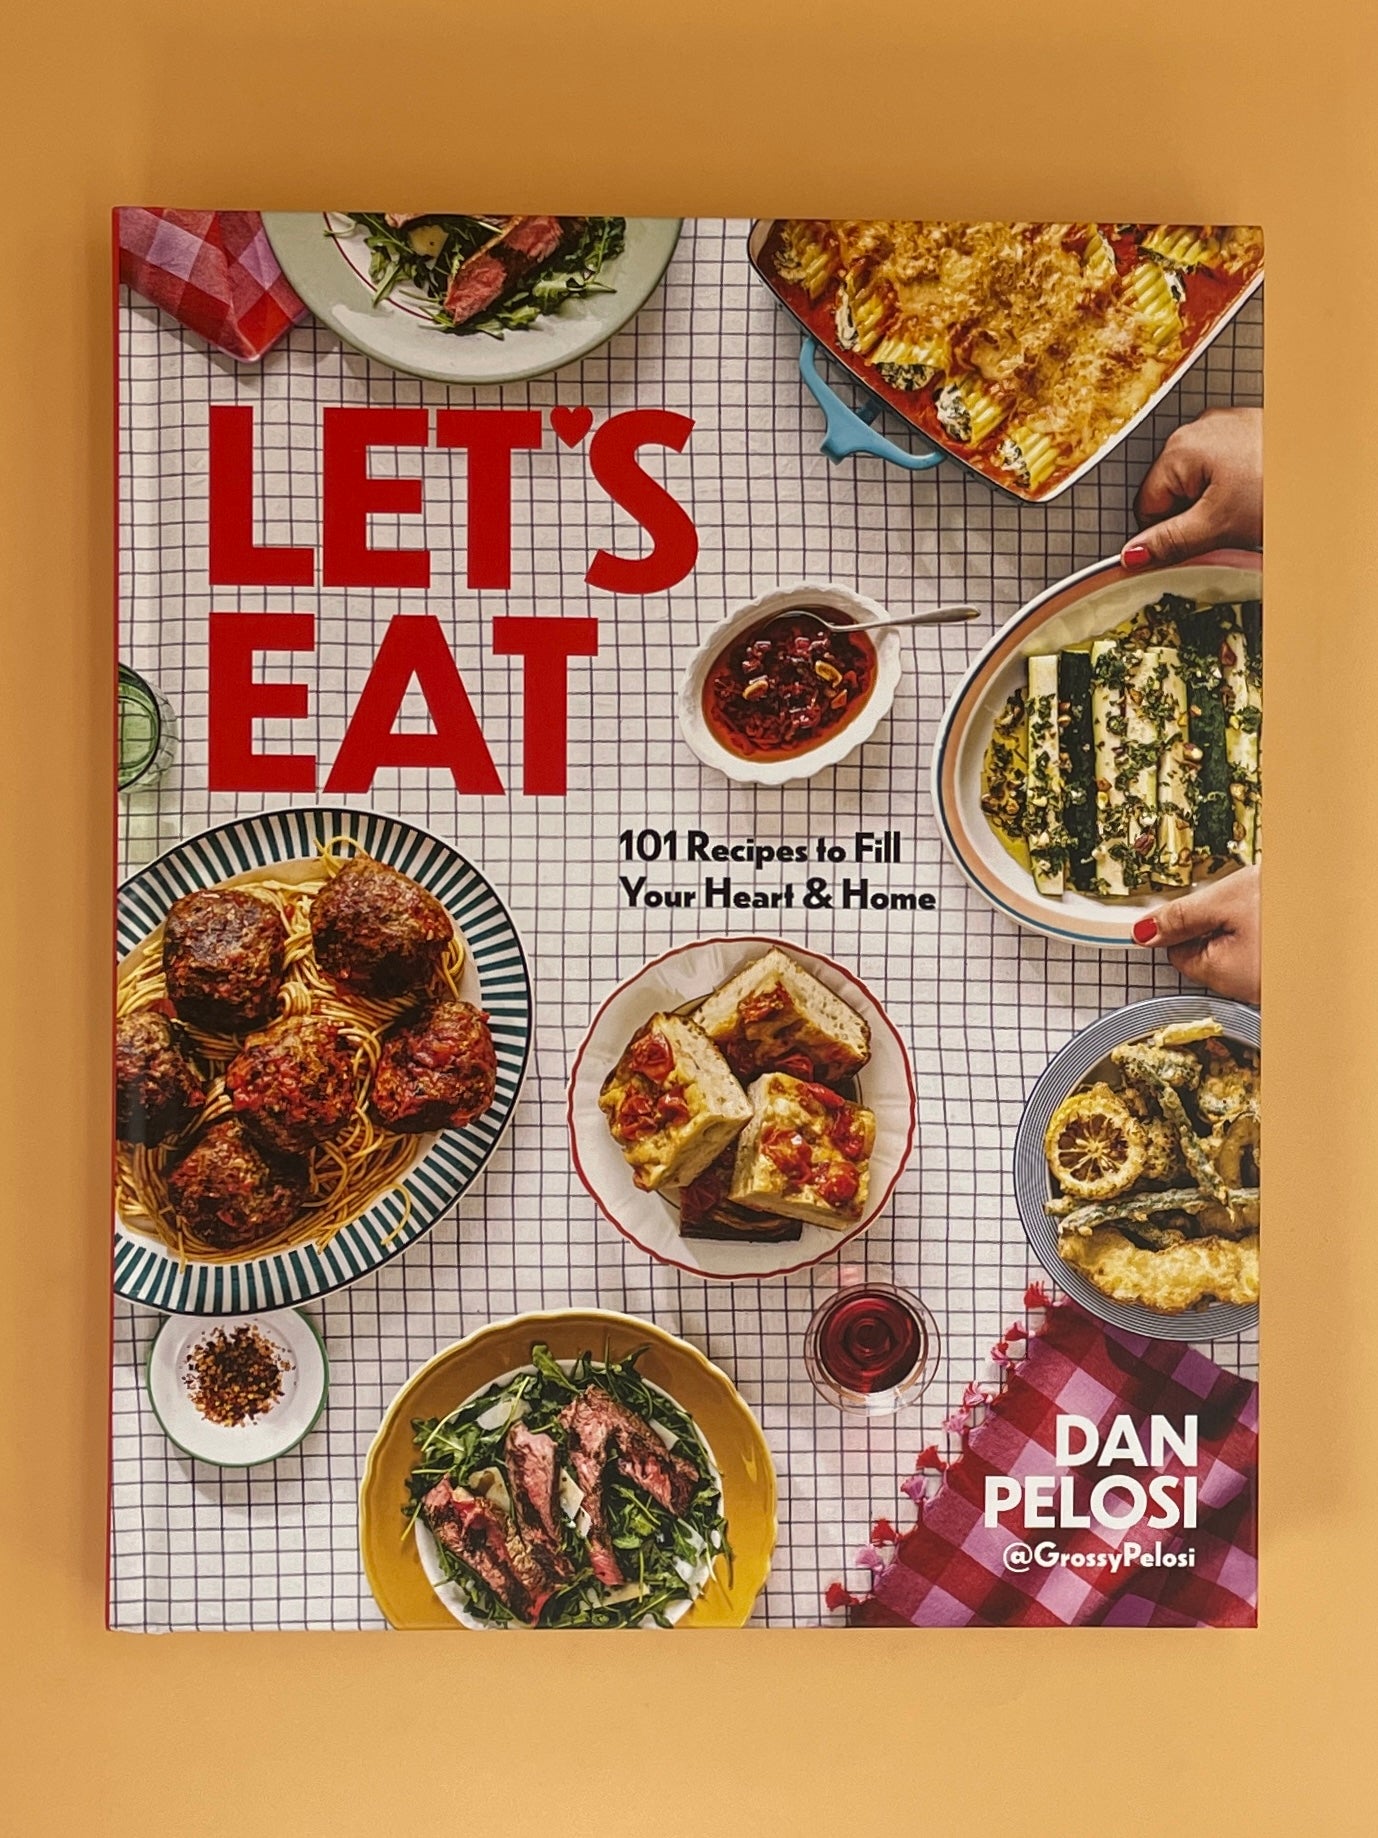 Let's Eat: 101 Recipes to Fill Your Heart & Home (Dan Pelosi) – Home Ec